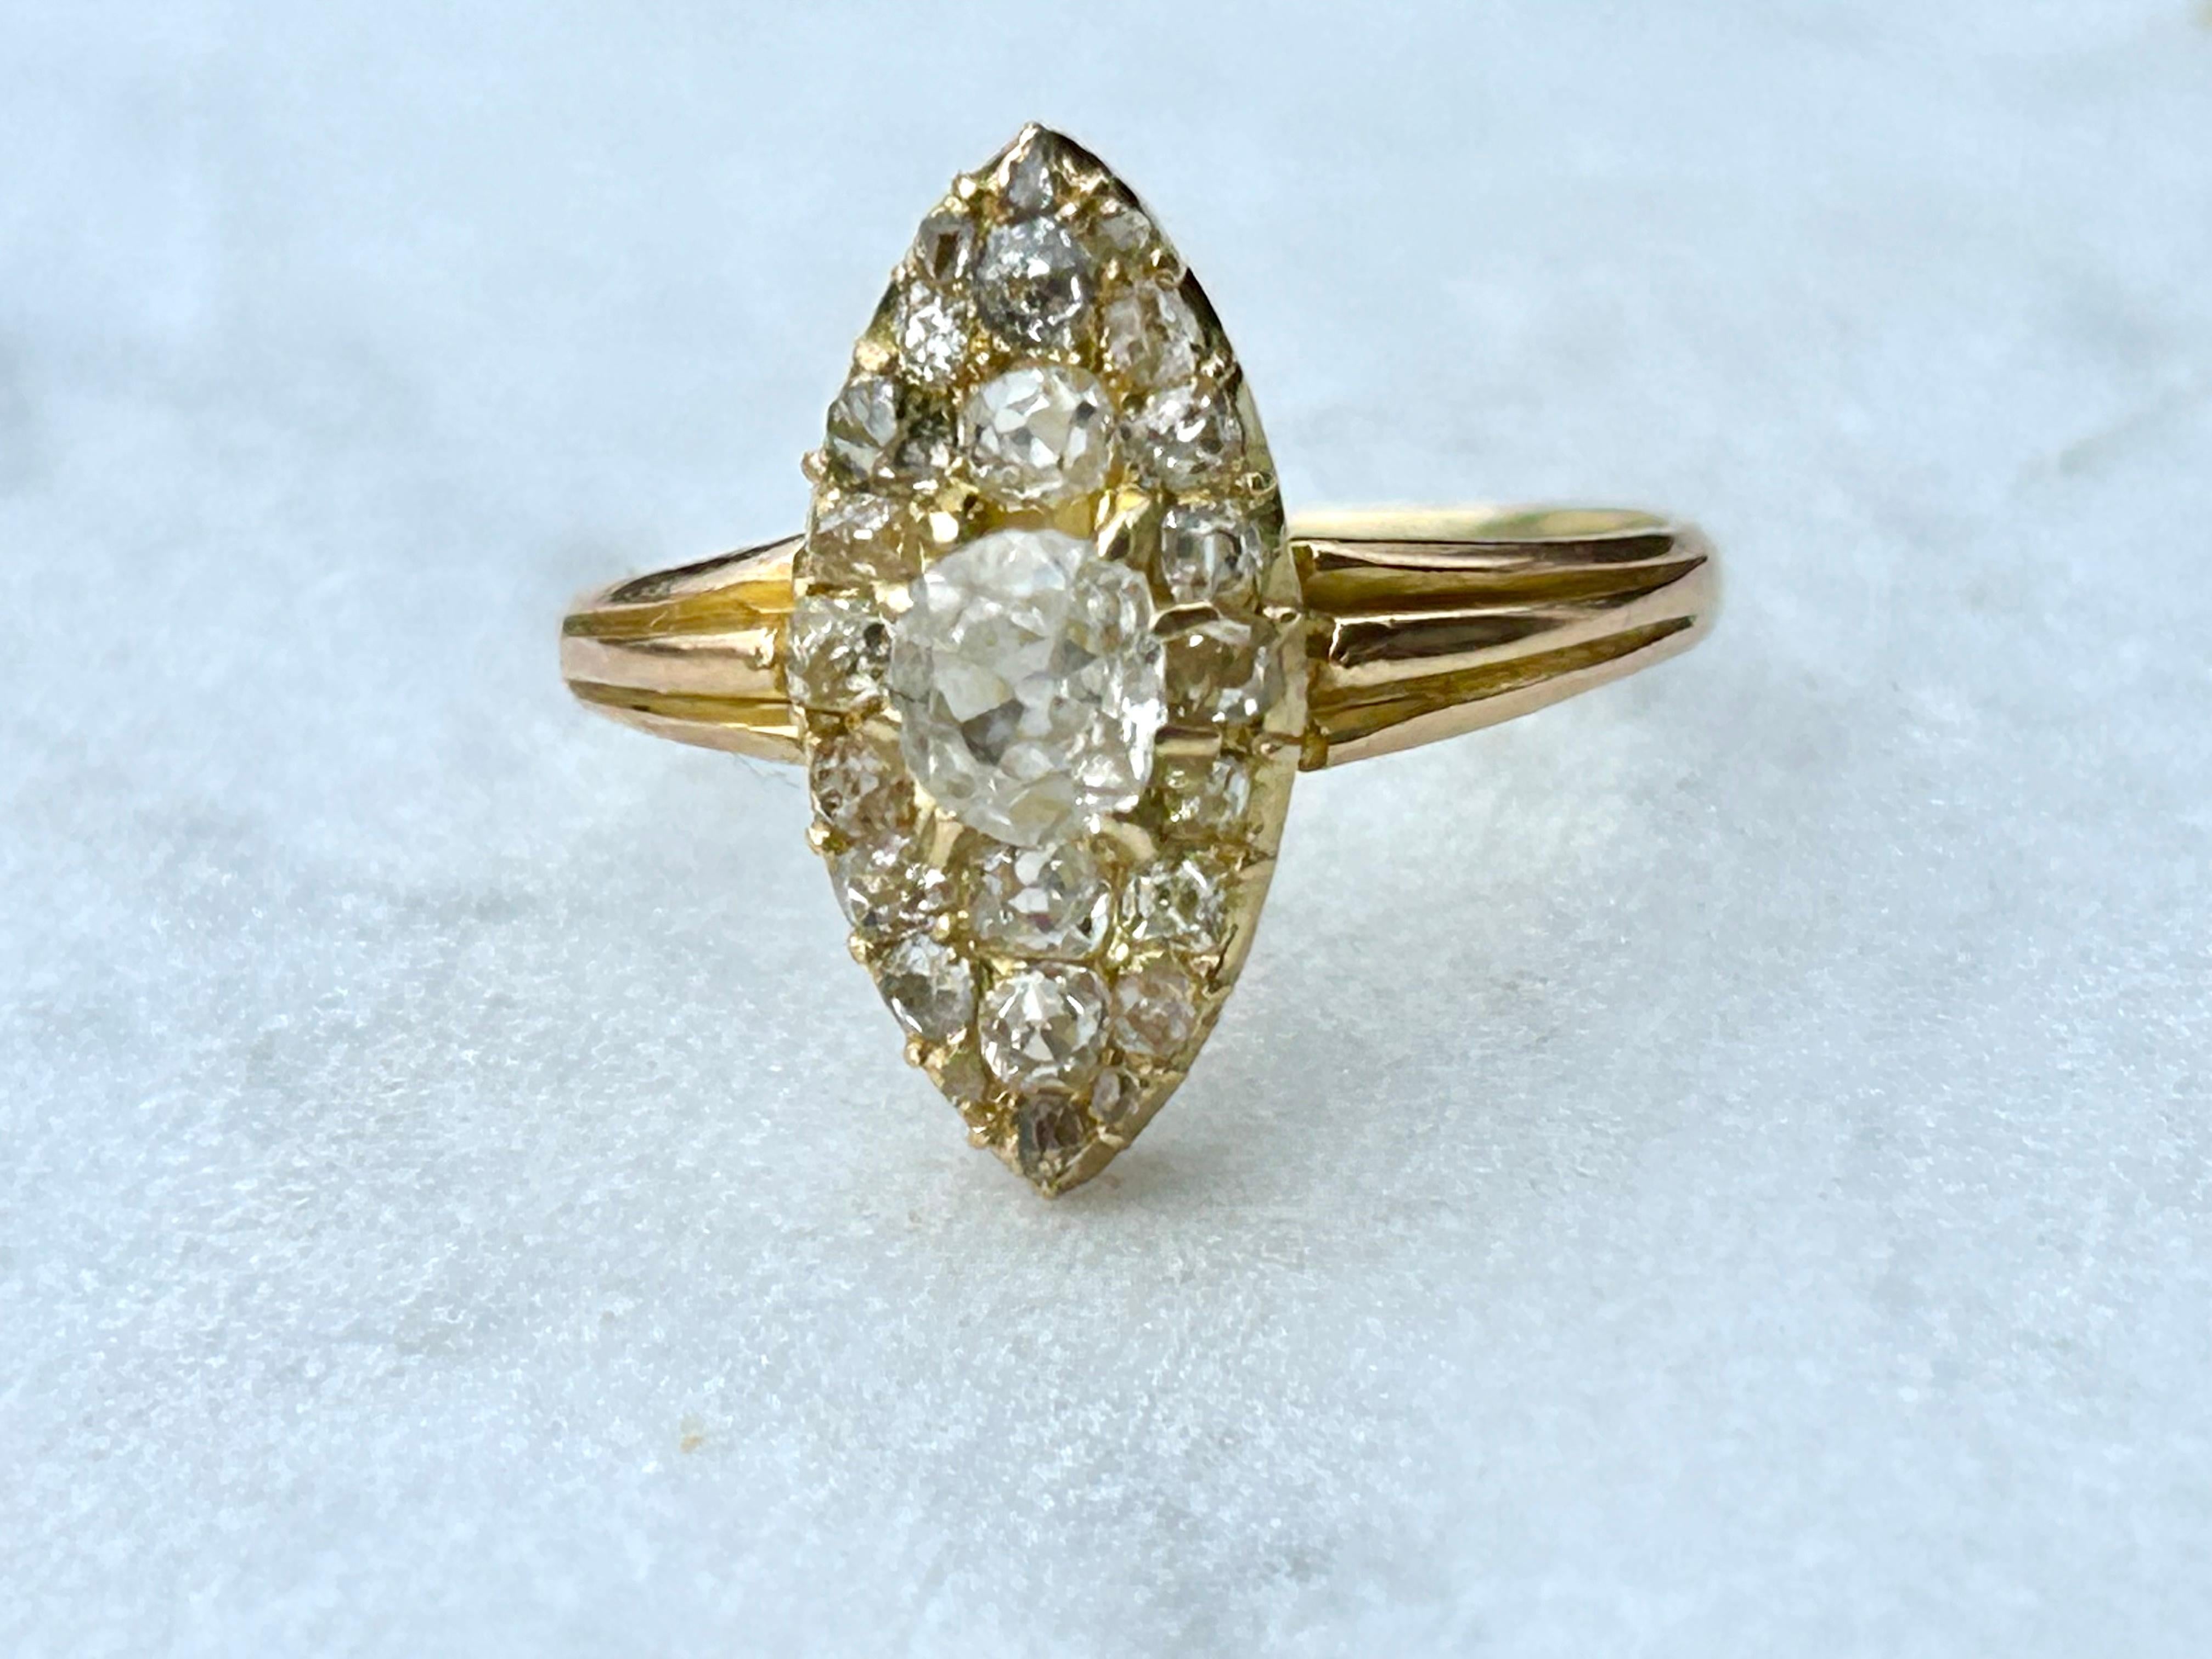 Circa 1880 Victorian 18k Gold Old Mine cut Diamond Navette. One of the prettiest navettes I've seen in awhile. This marquise shaped ring packs a punch! The sparkle on this piece is truly unreal.  It's jam-packed with old mine cuts and rose cuts